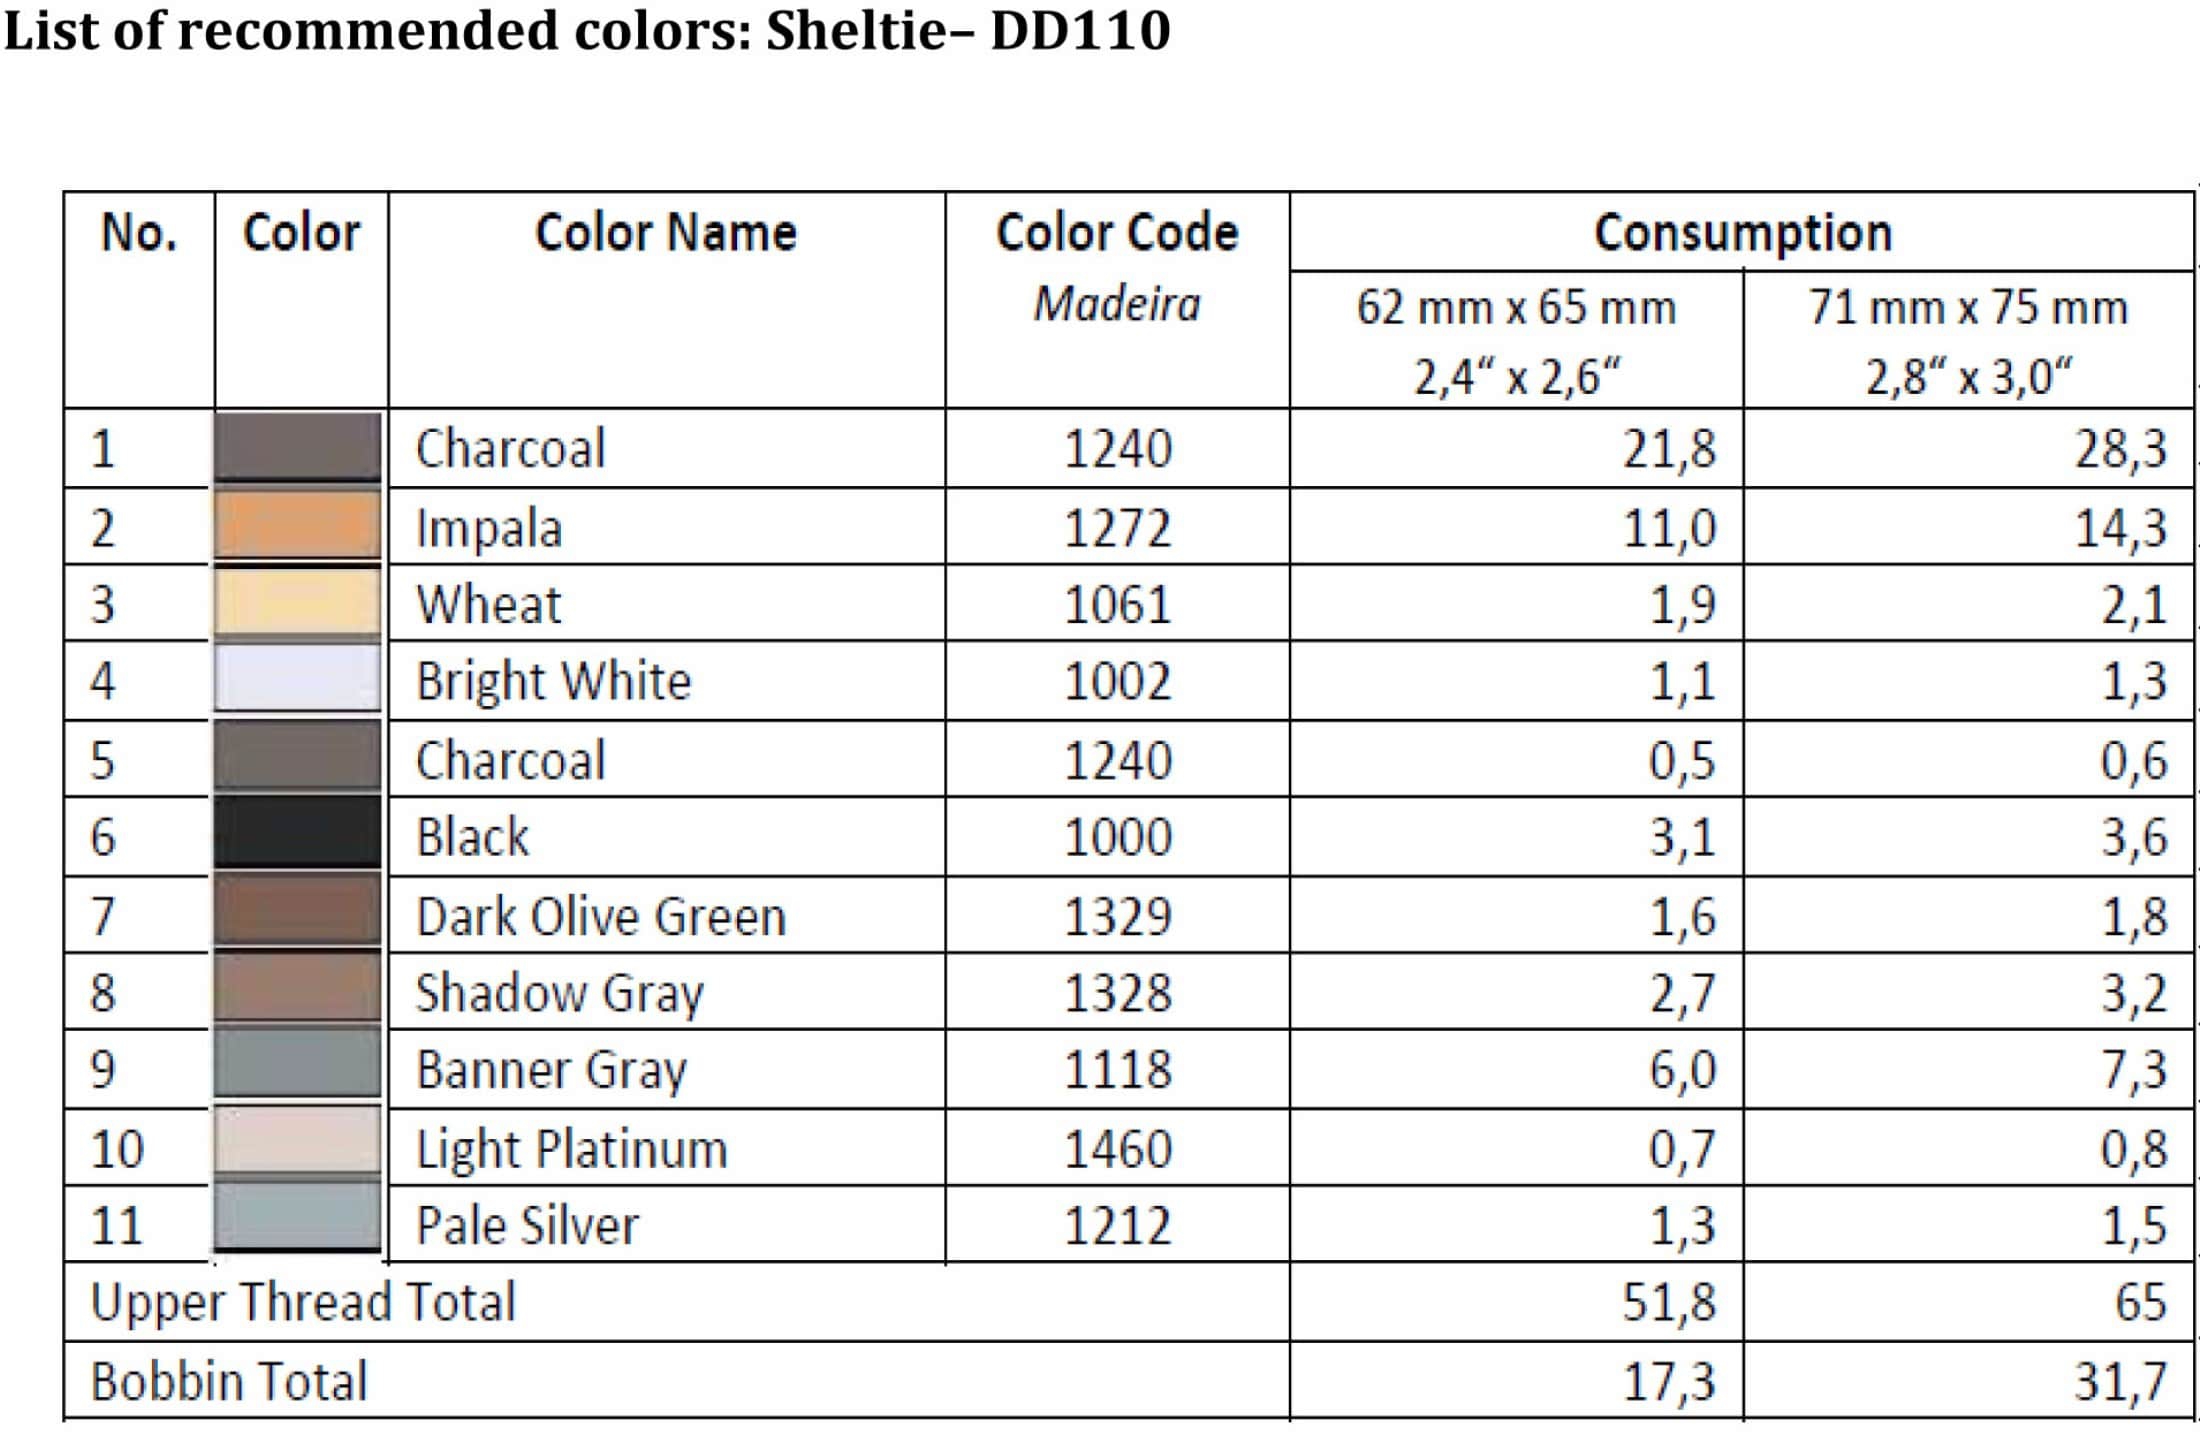 List of recommended colors - DD110